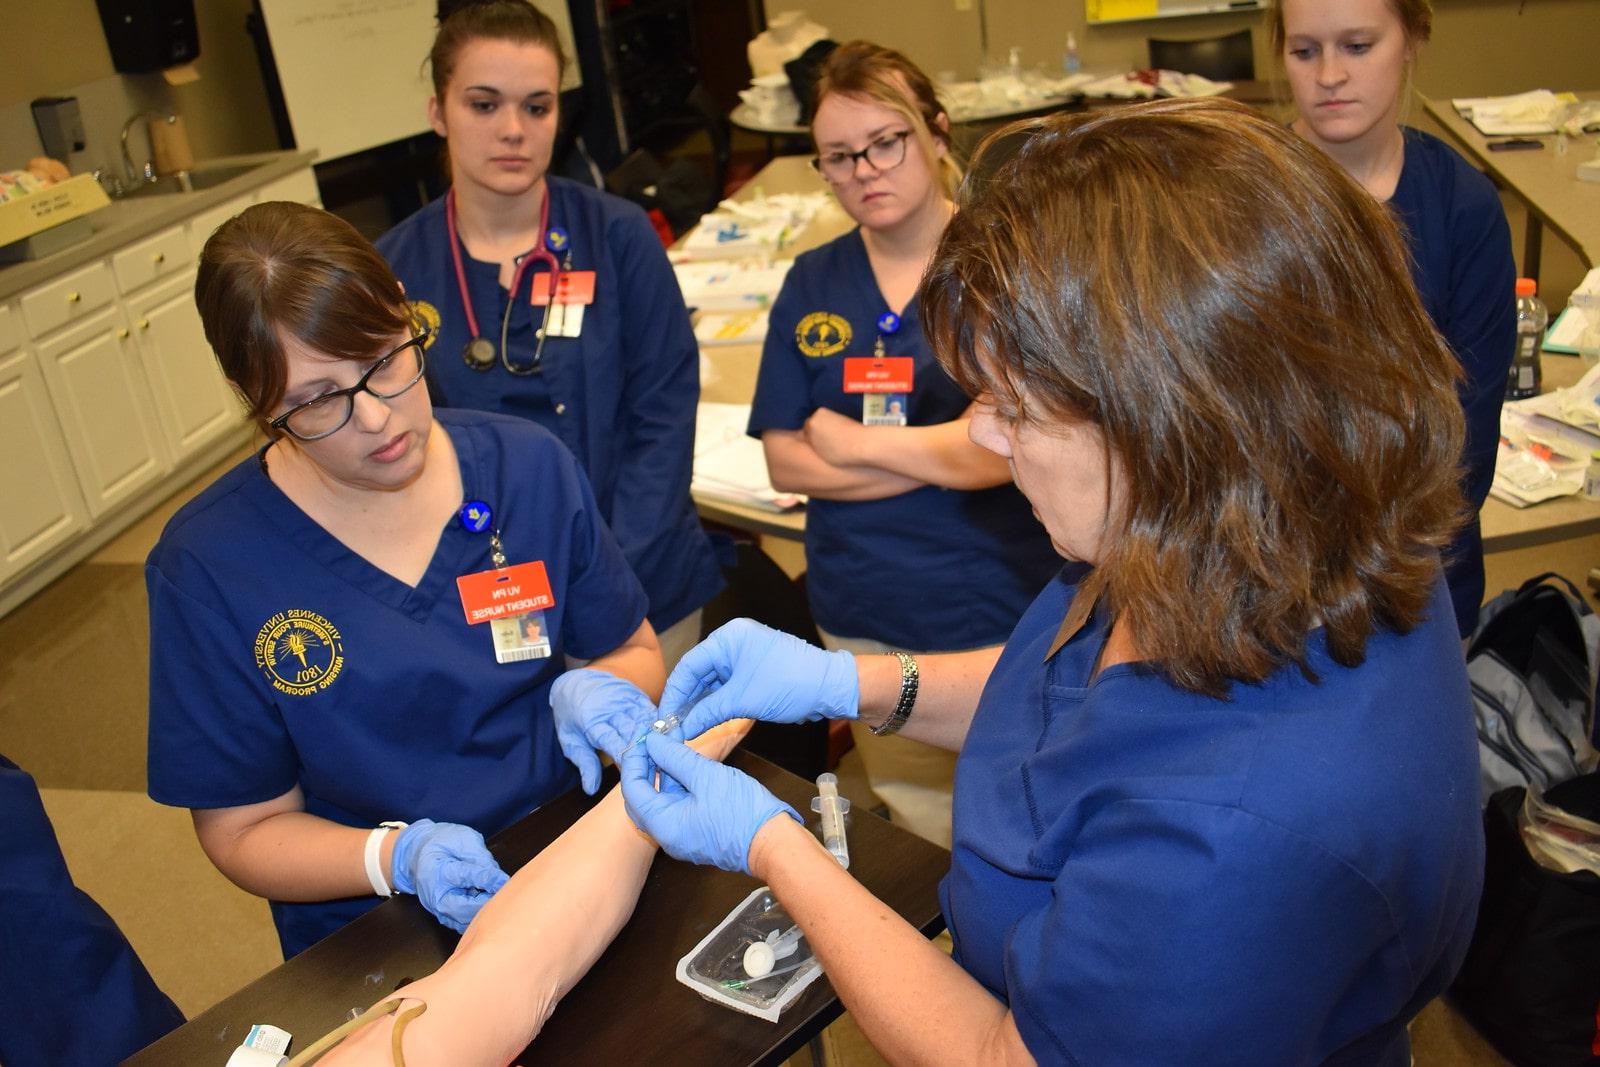 A group of nursing students practicing using needles on a training arm